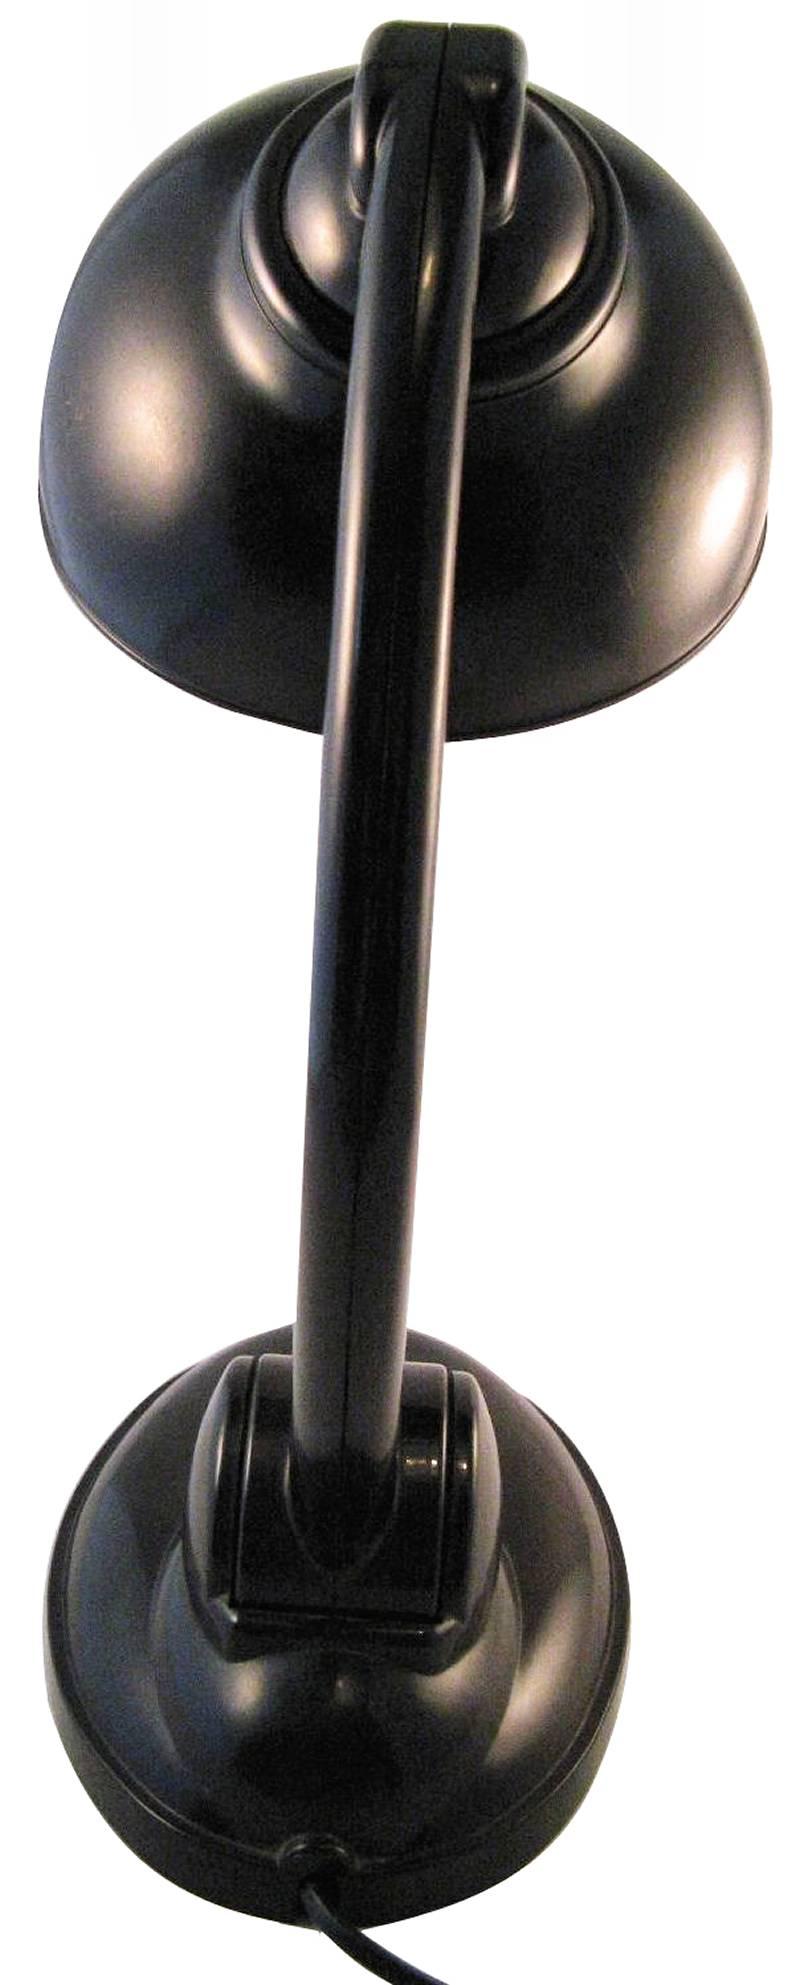 A stunning example of Eric Kirkman Cole's table lamp in superb brown bakelite. A model designed in the 1930's and produced in European countries under License. The shade is mounted to a shoulder joint and can be adjusted in all directions, giving